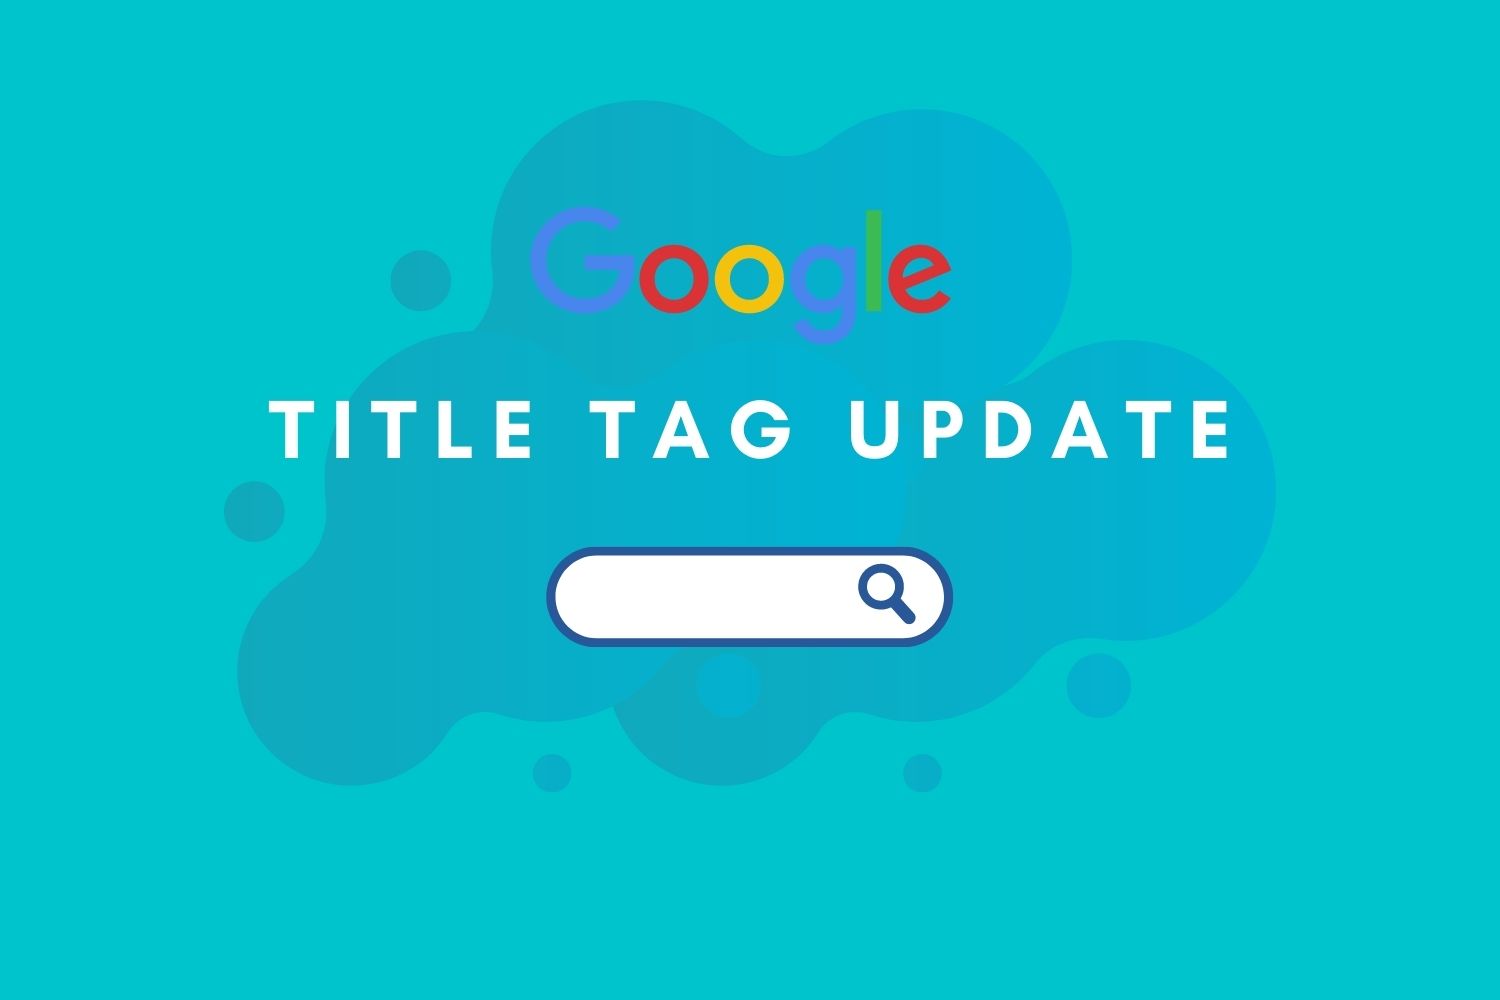 Google title tag update